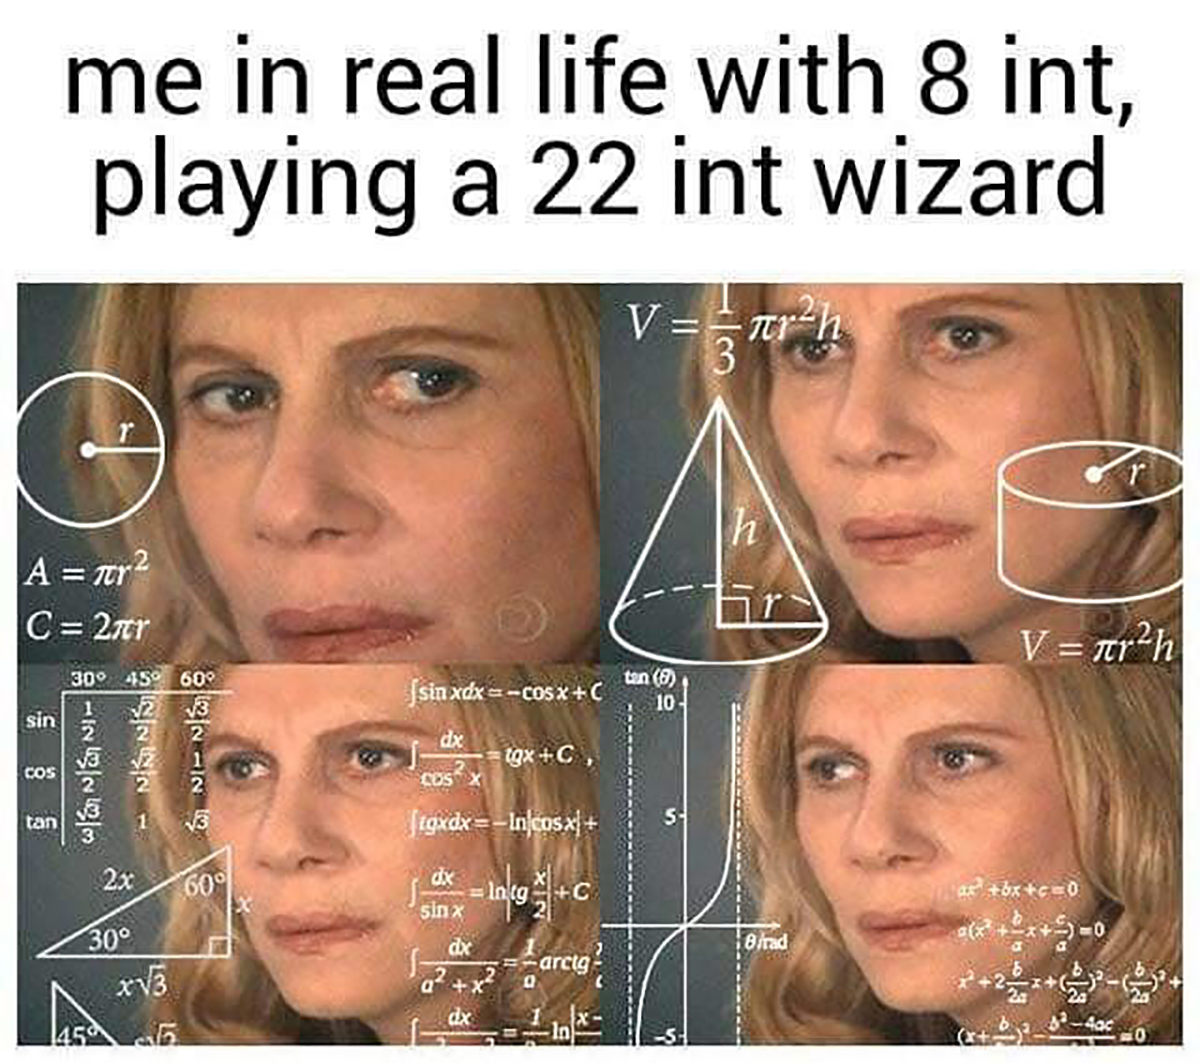 monday memes - head - A 7tr C2r sin Cos me in real life with 8 int, playing a 22 int wizard tan 30 45 60 23 Innr Mansg 2x 30 x3 45 37 07 EnNe 2 3 60% sinxdx COsx C dx tgxC, Cos ftgxdxIncosx dx sinx dx dx IngC Ing arcig. V Tr tan 9 10 Bad h V rh bxc0 No